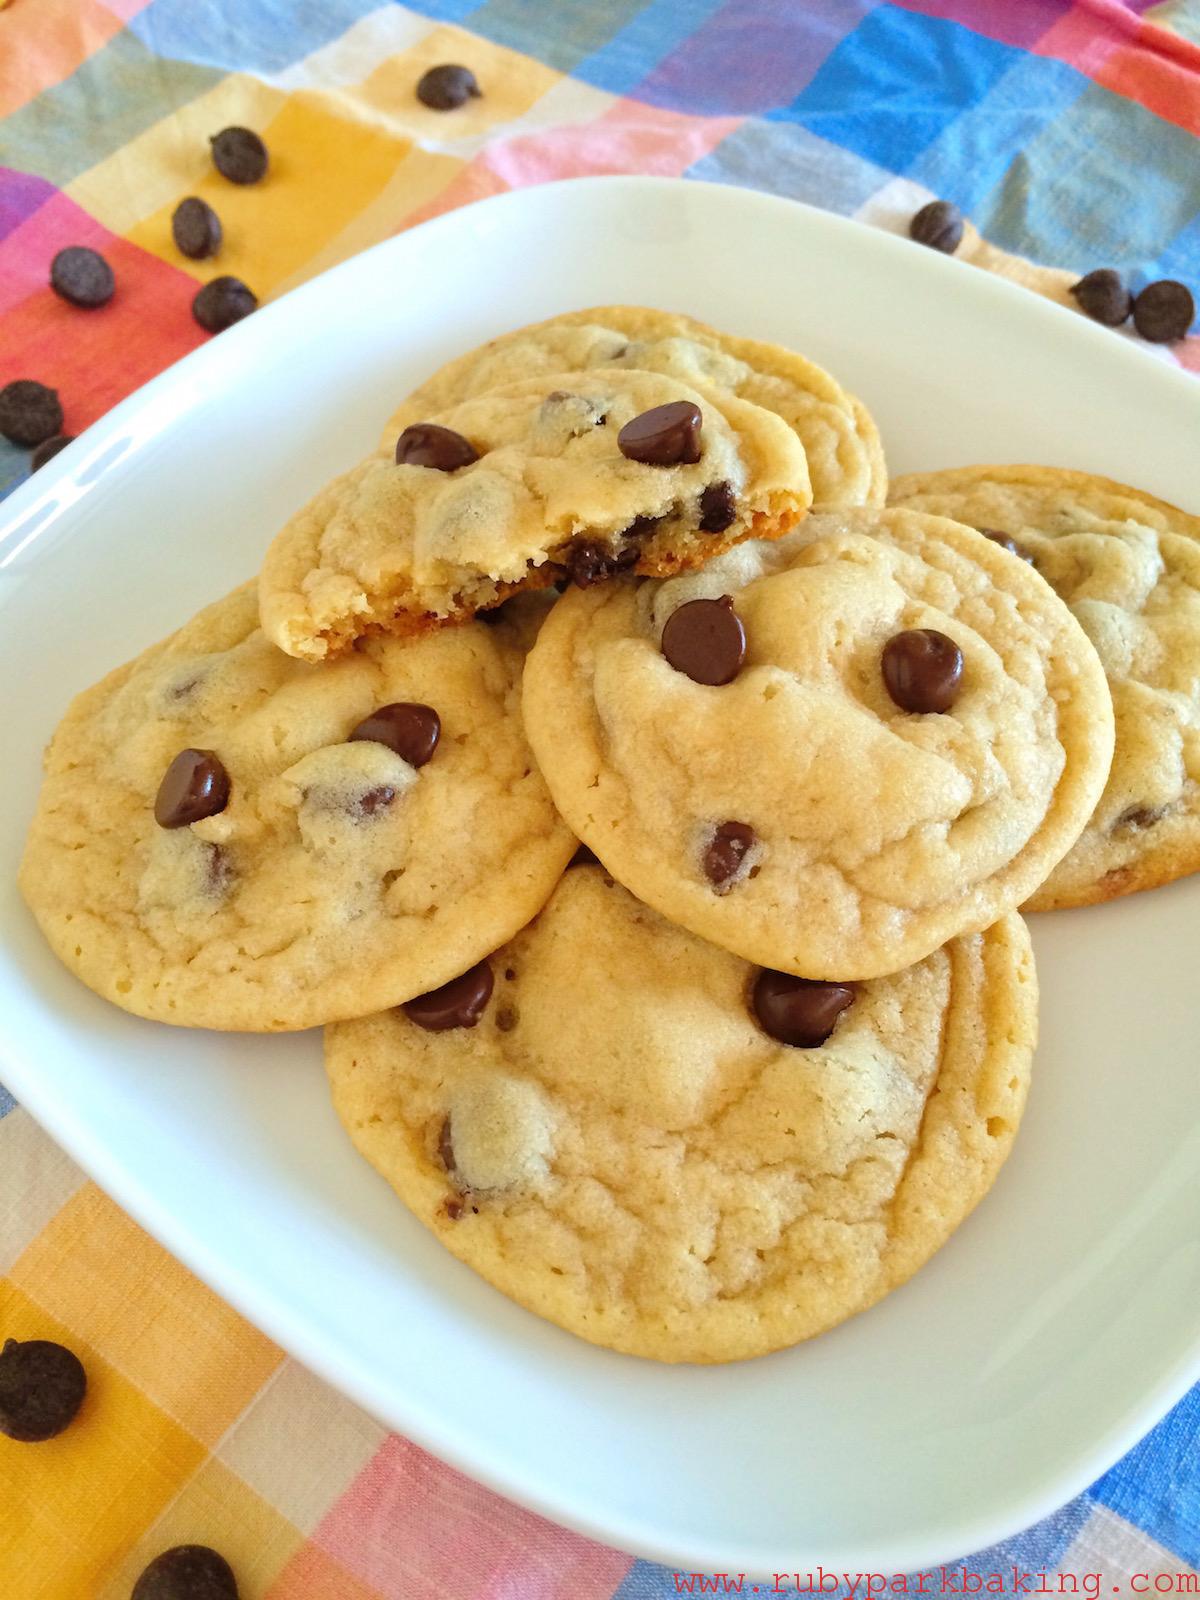 Chewy Chocolate Chip Cookies on rubyparkbaking.com